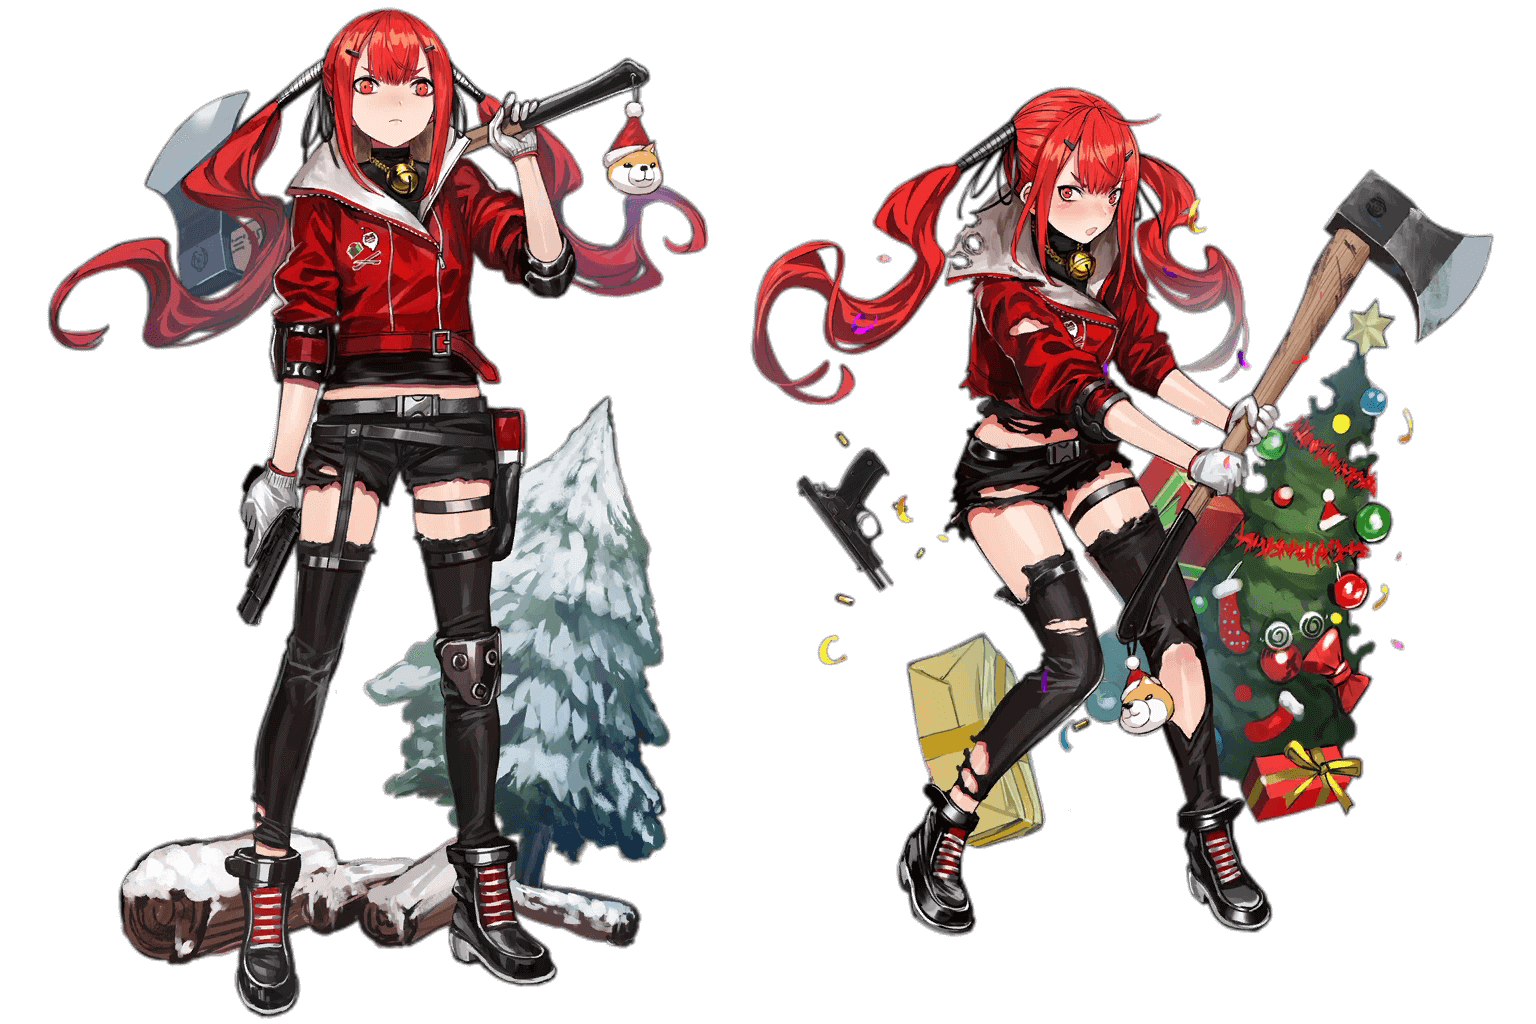 CZ75's "Winter Forager" Costume